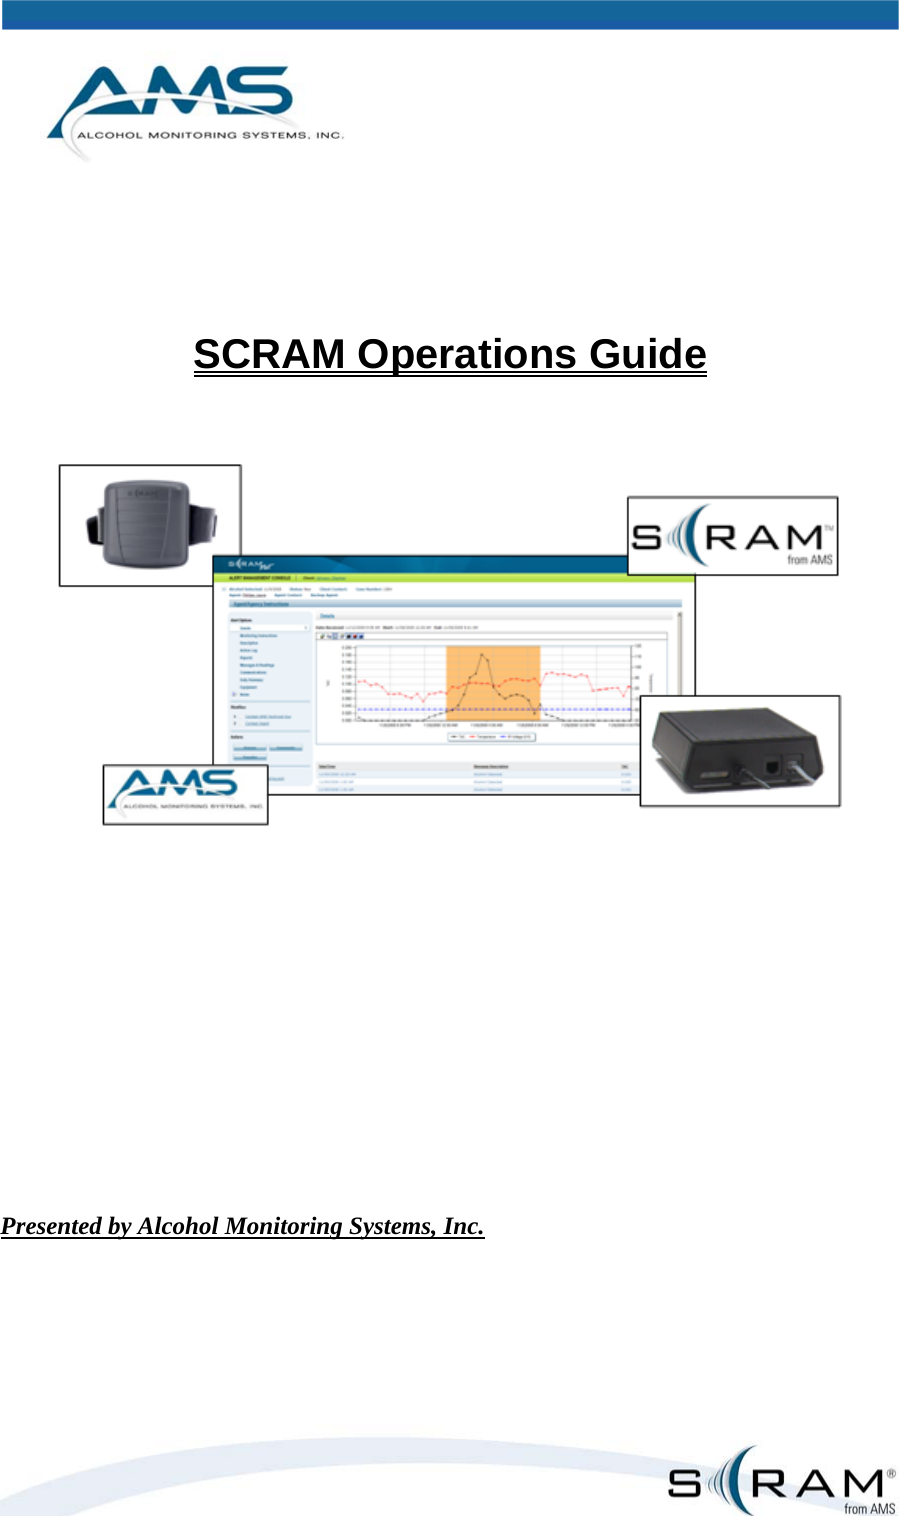     SCRAM Operations Guide  Presented by Alcohol Monitoring Systems, Inc.  